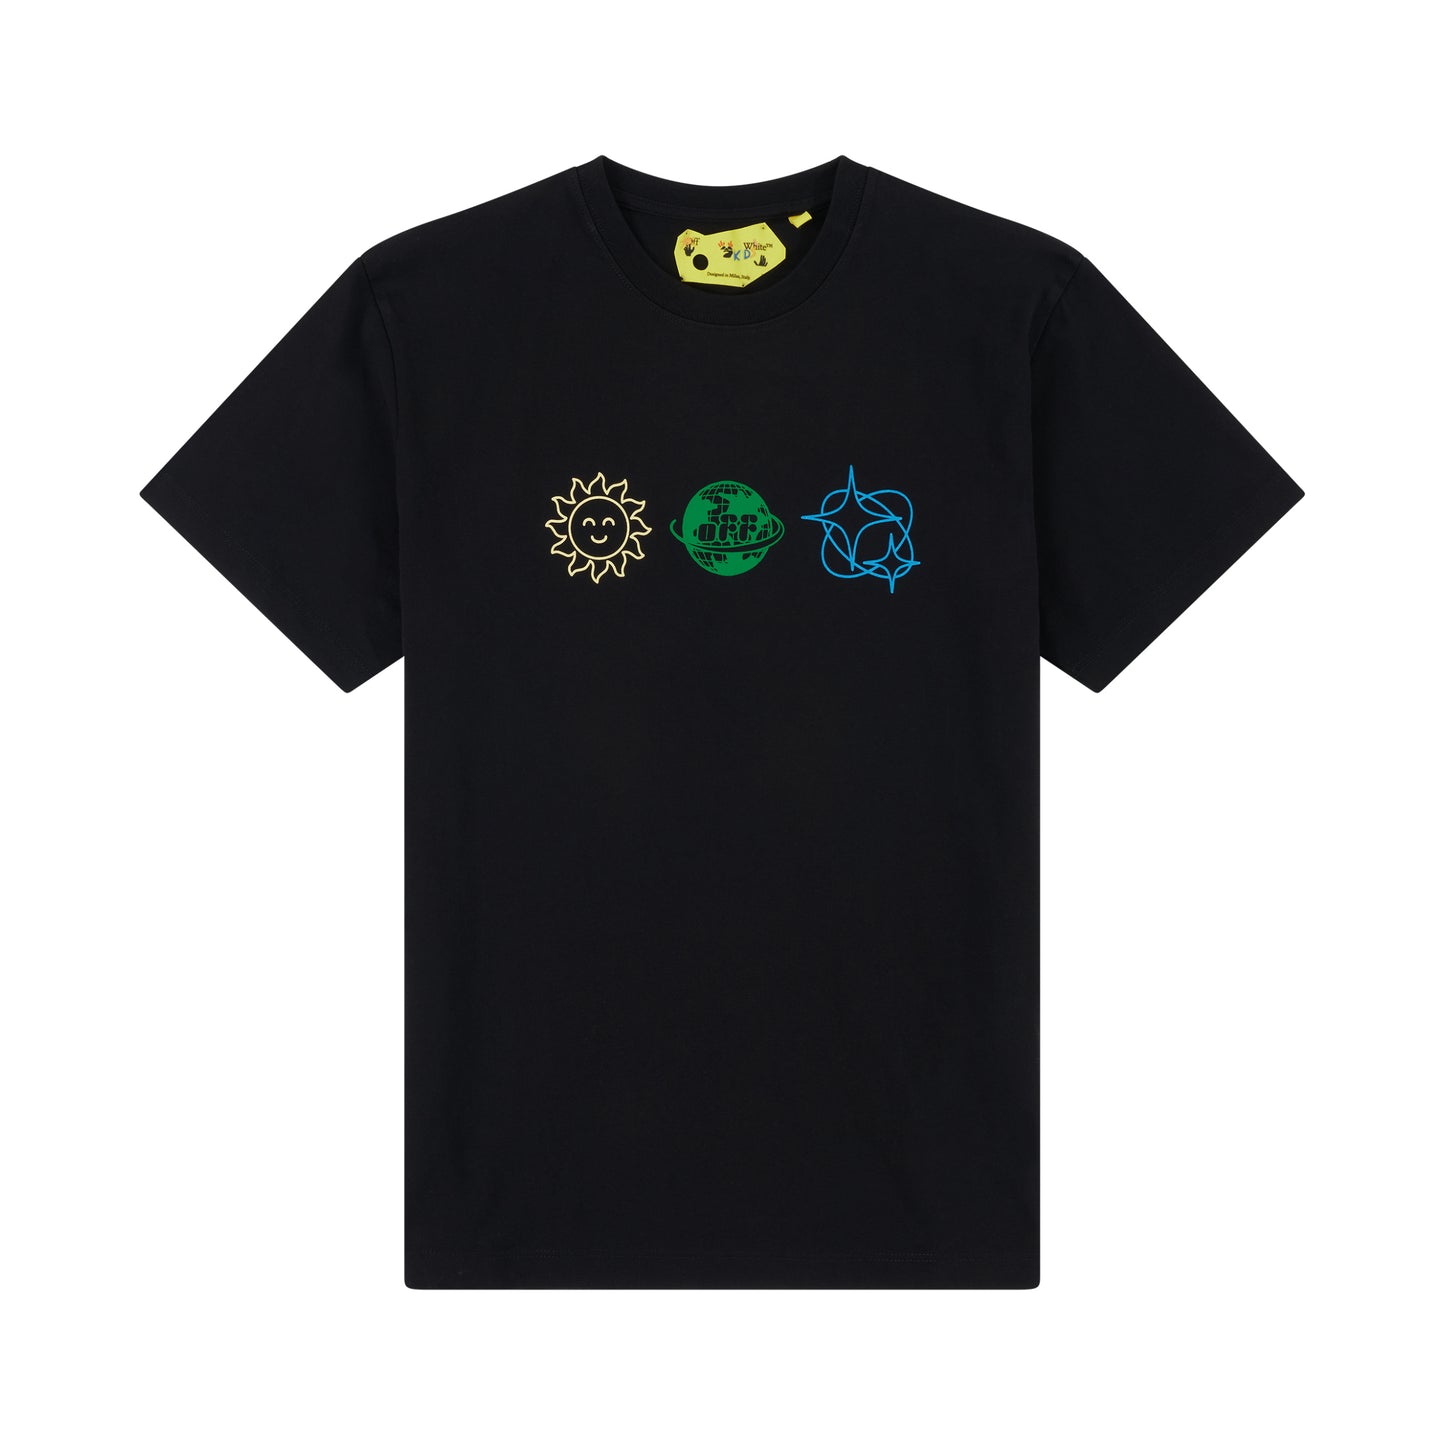 Elements Short Sleeves T-Shirt in Black/Blue